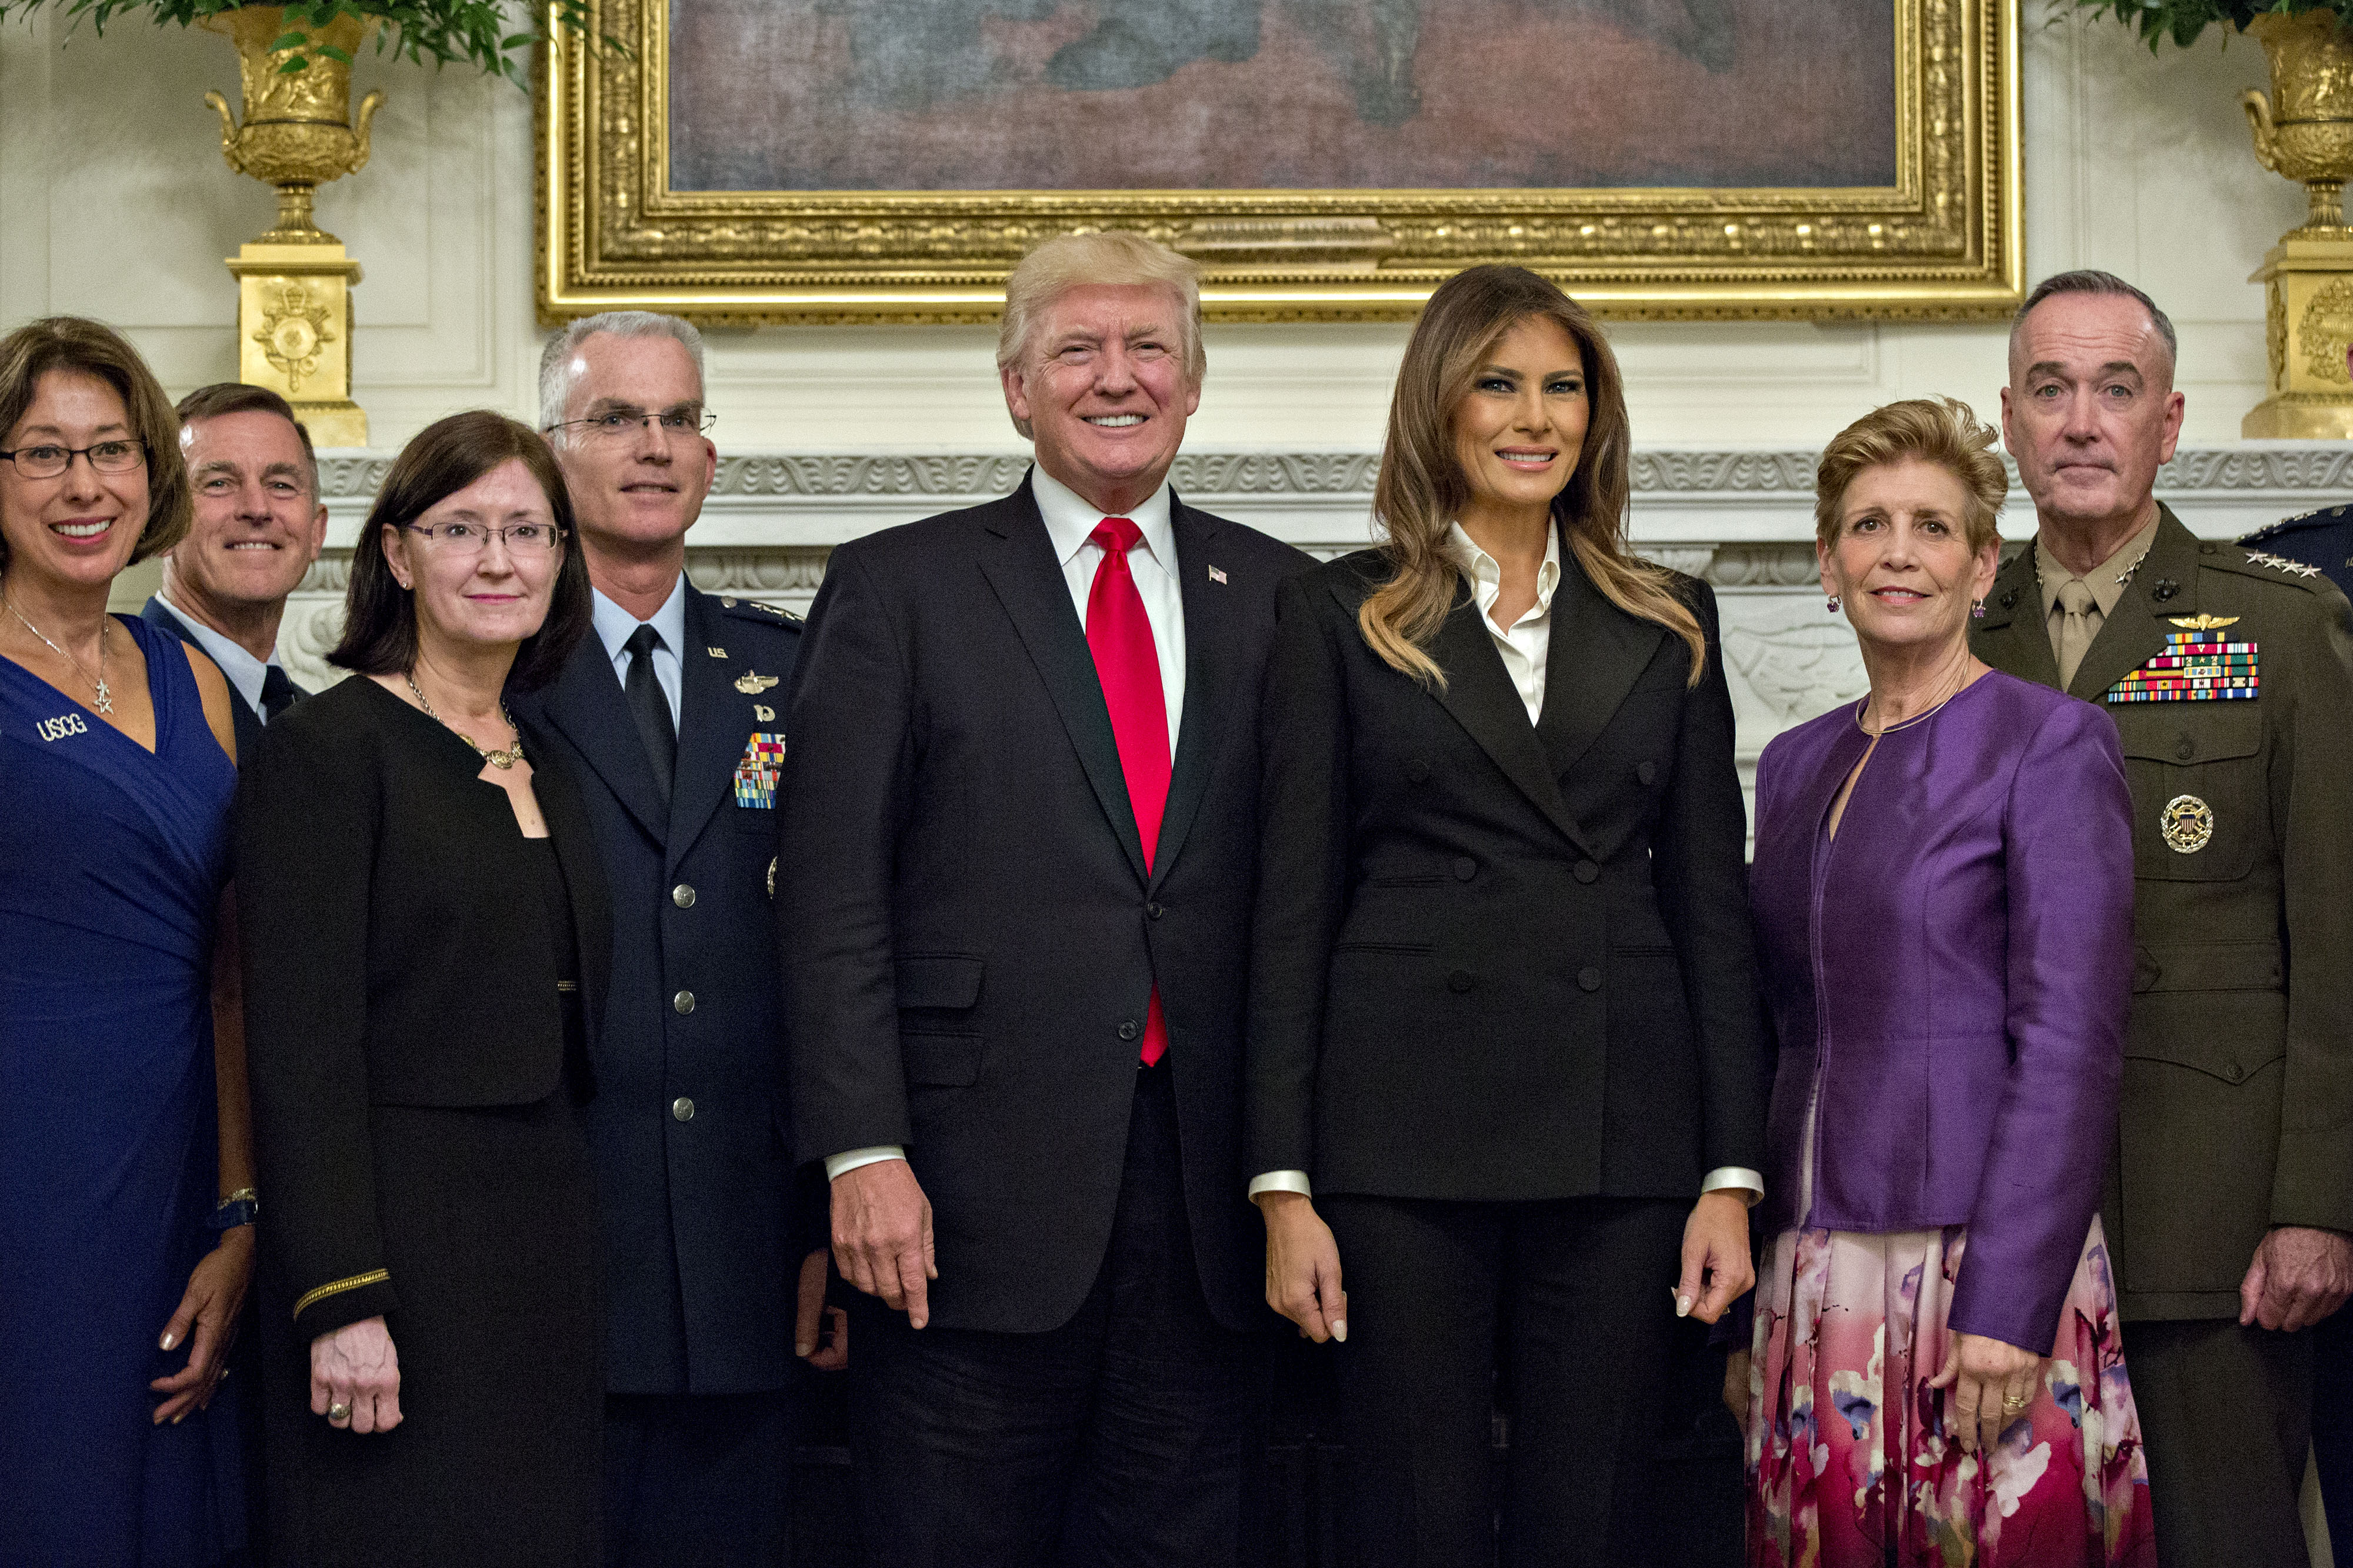 WASHINGTON, DC - OCTOBER 5: U.S. President Donald Trump and first lady Melania Trump pose for pictures with senior military leaders and spouses, including including Gen. Joseph Dunford (R), chairman of the joint chiefs of staff, and General Paul Selva (4th L), vice chairman of the joint chiefs of staff, after a briefing in the State Dining Room of the White House October 5, 2017 in Washington, D.C. The Trumps are hosting the group for a dinner in the Blue Room. (Photo by Andrew Harrer-Pool/Getty Images)